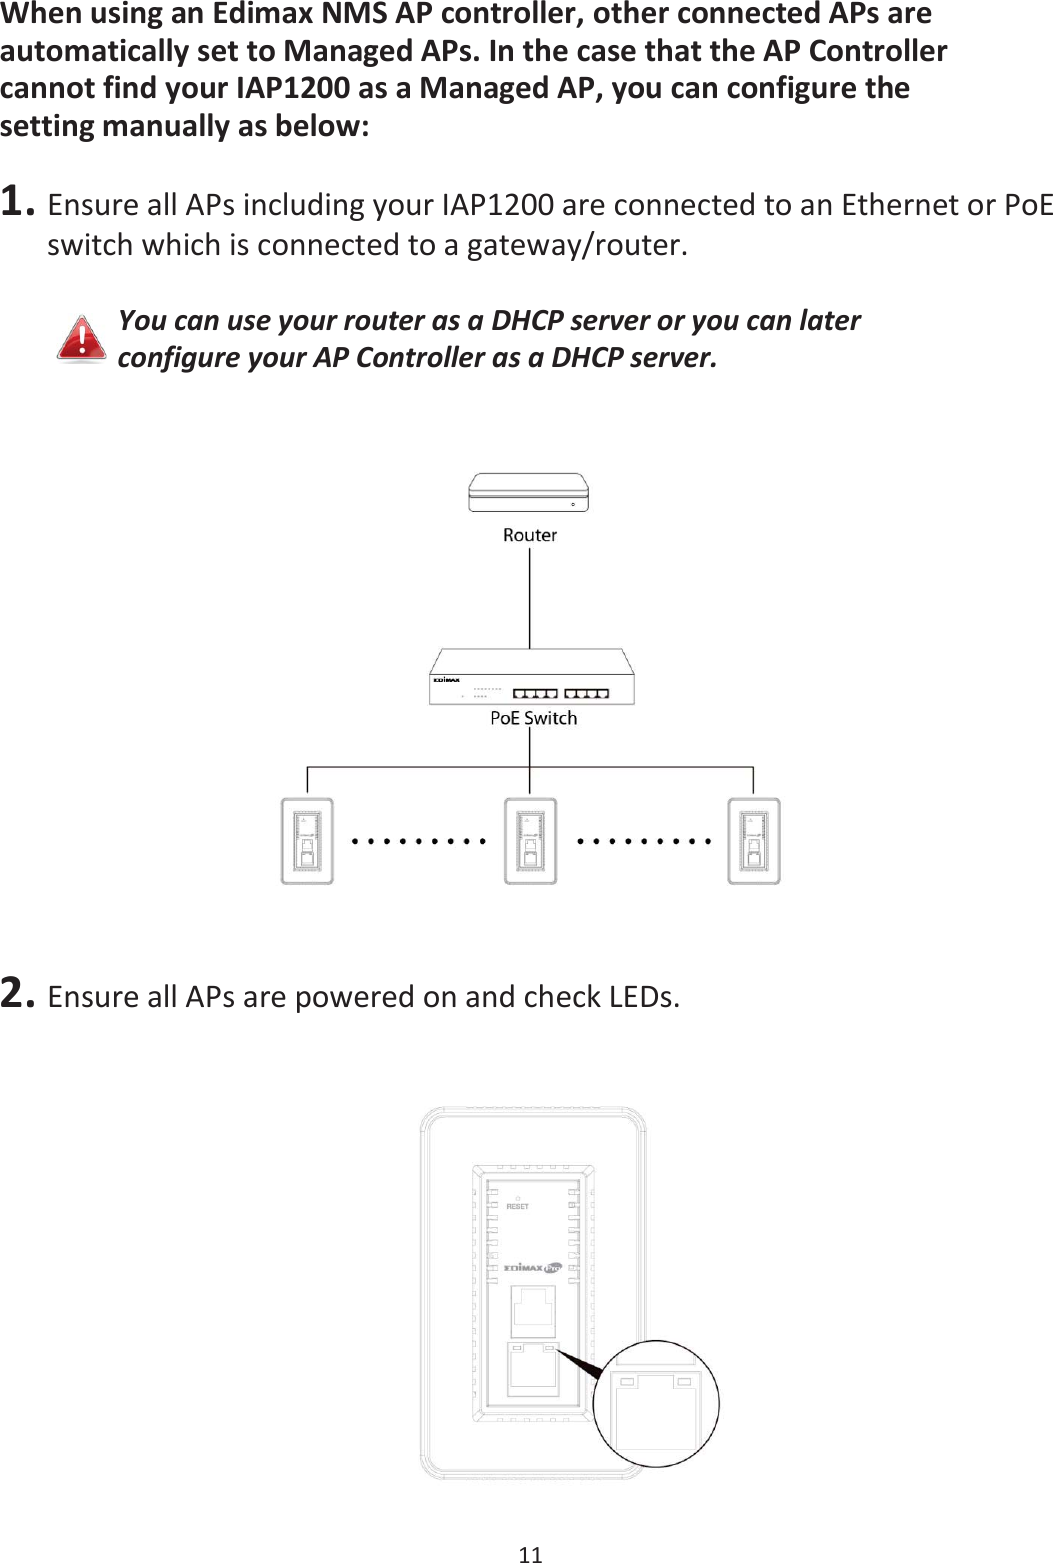 11  When using an Edimax NMS AP controller, other connected APs are automatically set to Managed APs. In the case that the AP Controller cannot find your IAP1200 as a Managed AP, you can configure the setting manually as below:  1. Ensure all APs including your IAP1200 are connected to an Ethernet or PoE switch which is connected to a gateway/router.  You can use your router as a DHCP server or you can later configure your AP Controller as a DHCP server.  2. Ensure all APs are powered on and check LEDs.   